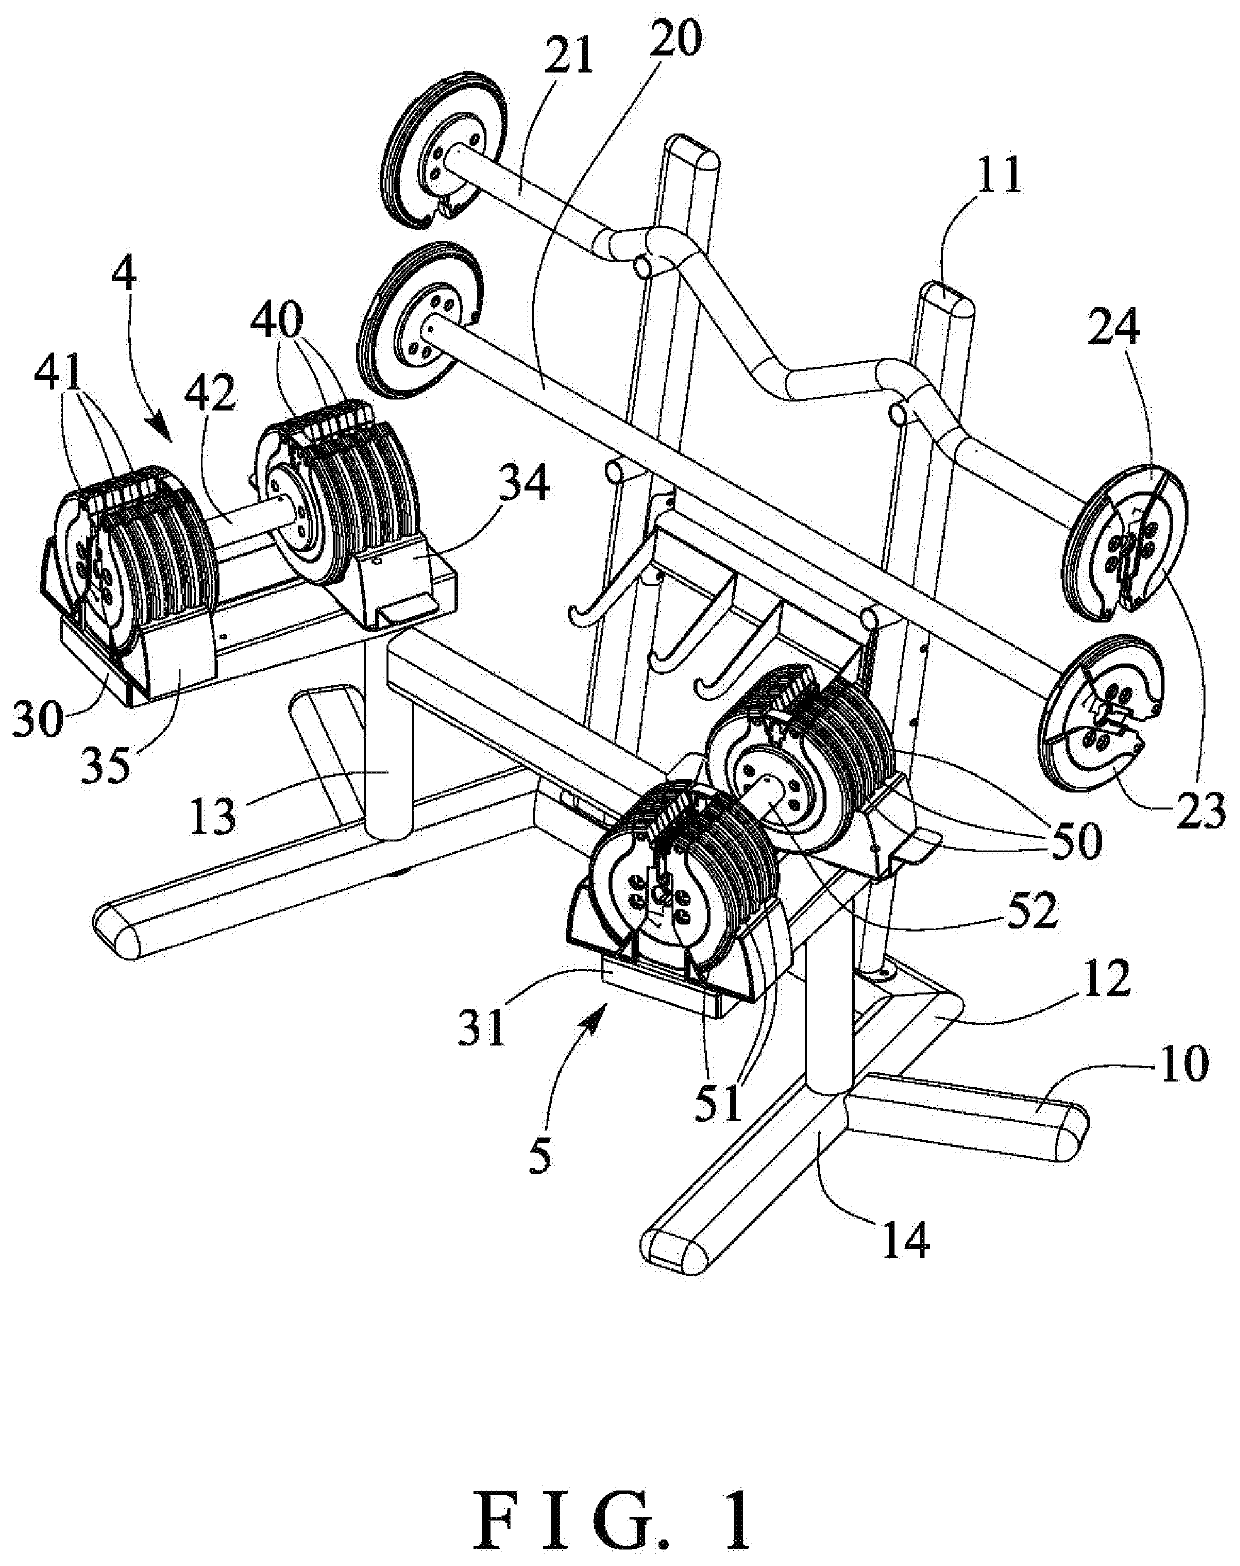 Dumbbell and barbell supporting system